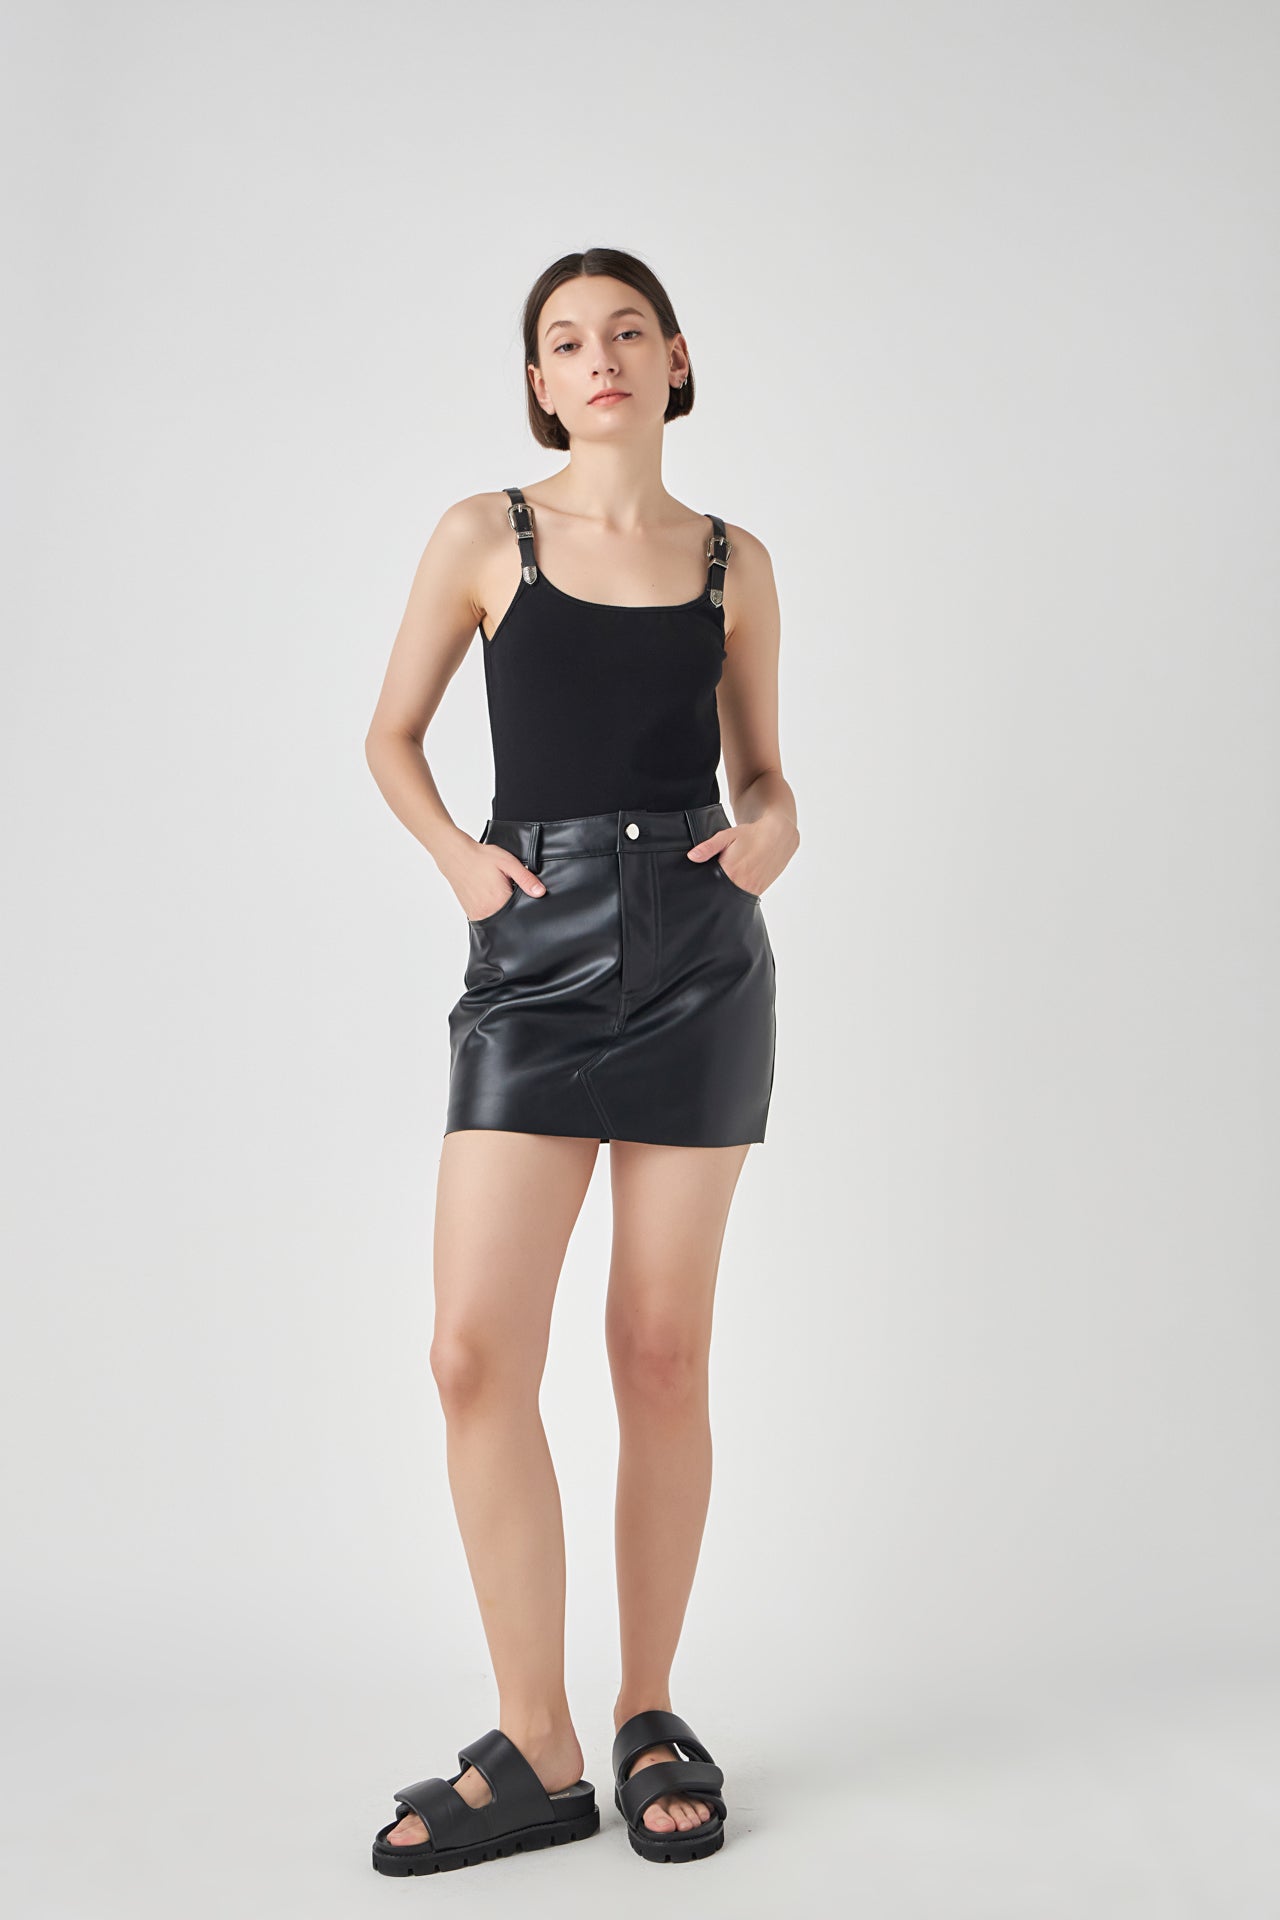 GREY LAB-Western Belt Tank Top-CAMI TOPS & TANK available at Objectrare